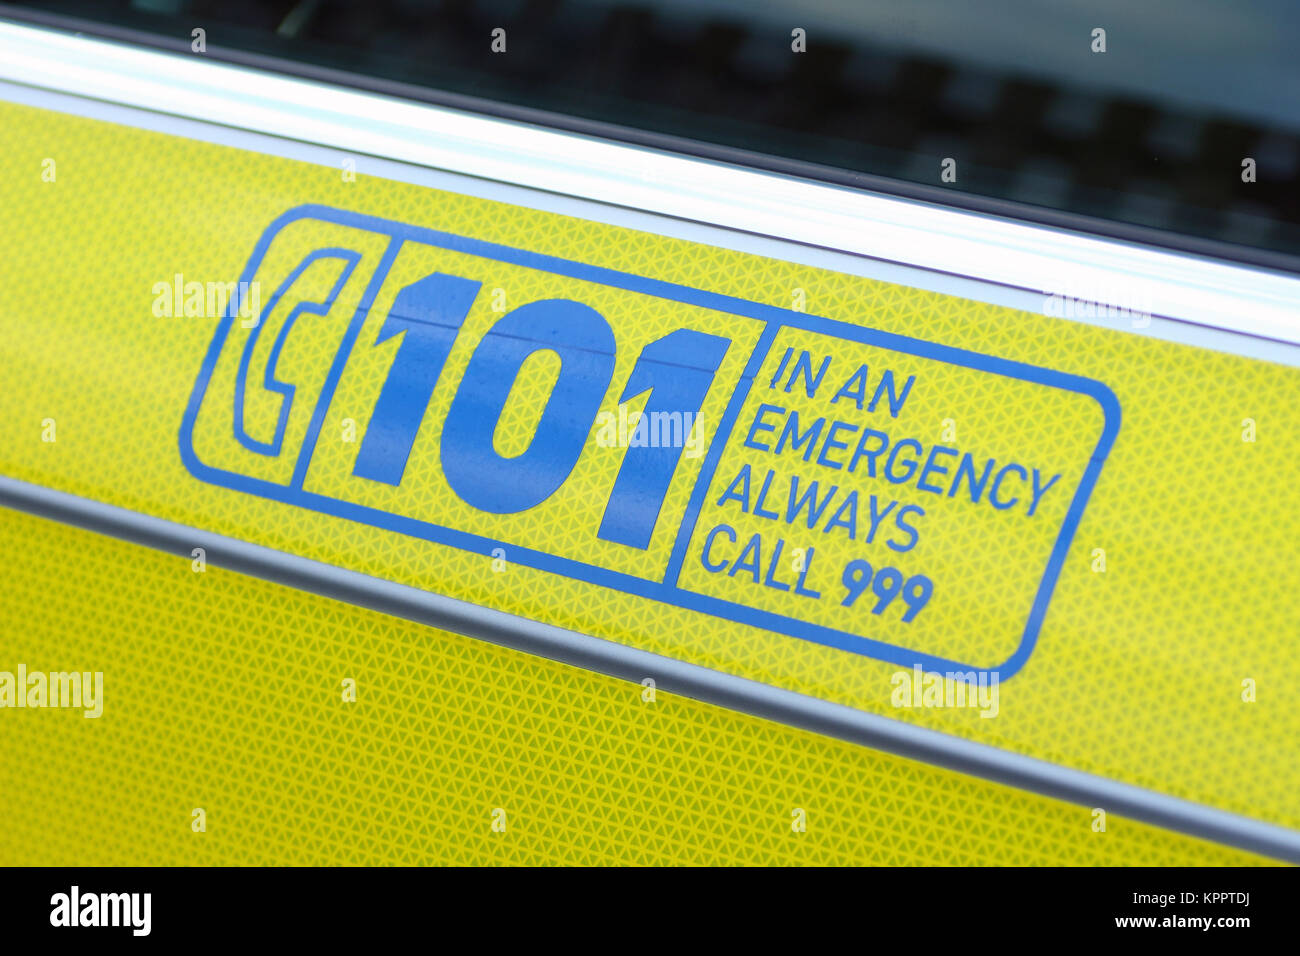 Close-up of side of Police Scotland police car, showing dial 101 and 999 information Stock Photo